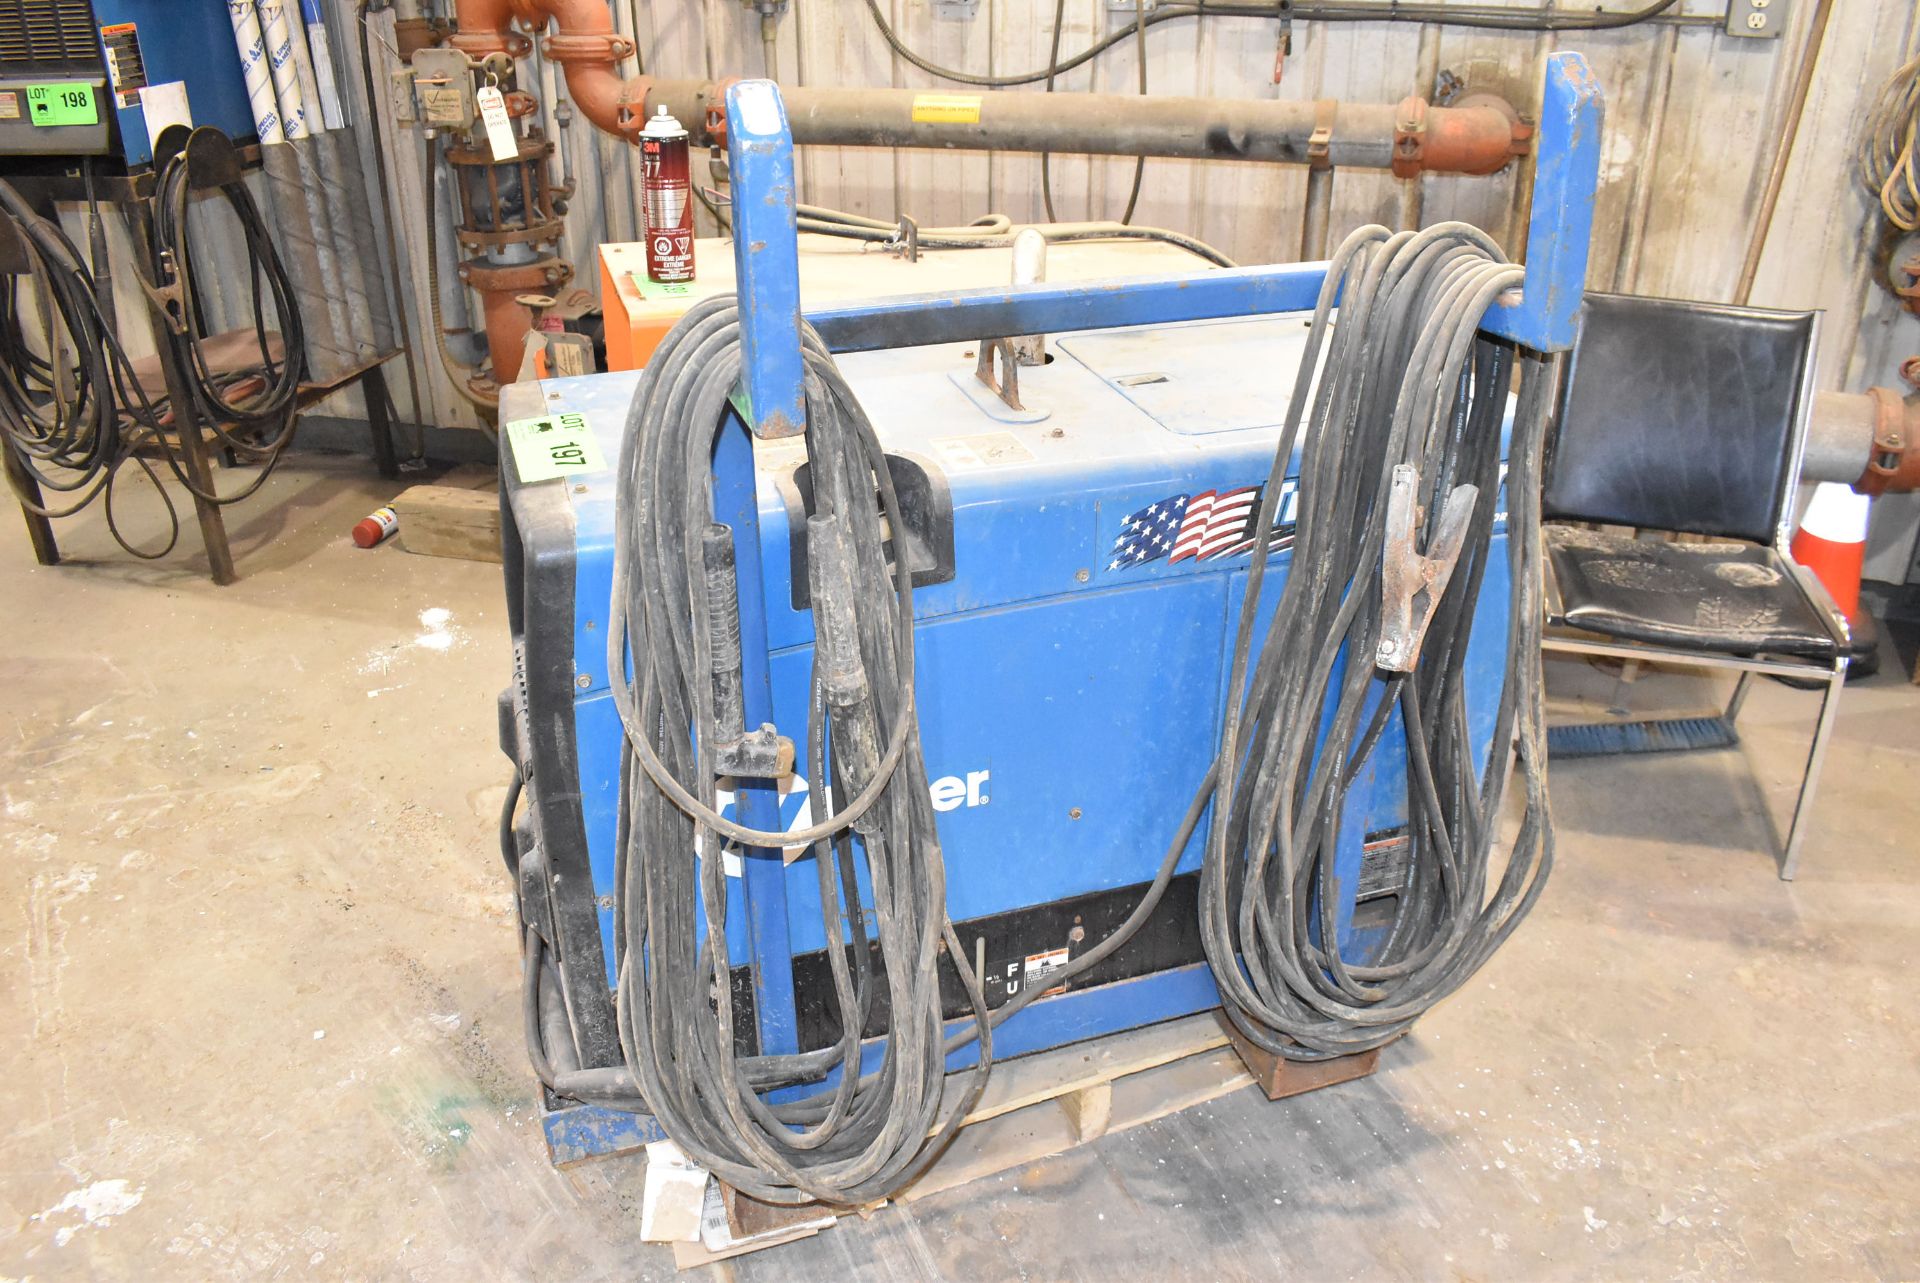 MILLER TRAILBLAZER 302 GAS POWERED CC/CV, AC/DC WELDER WITH 10,500 WATT GENERATOR WITH CABLES AND - Image 4 of 7